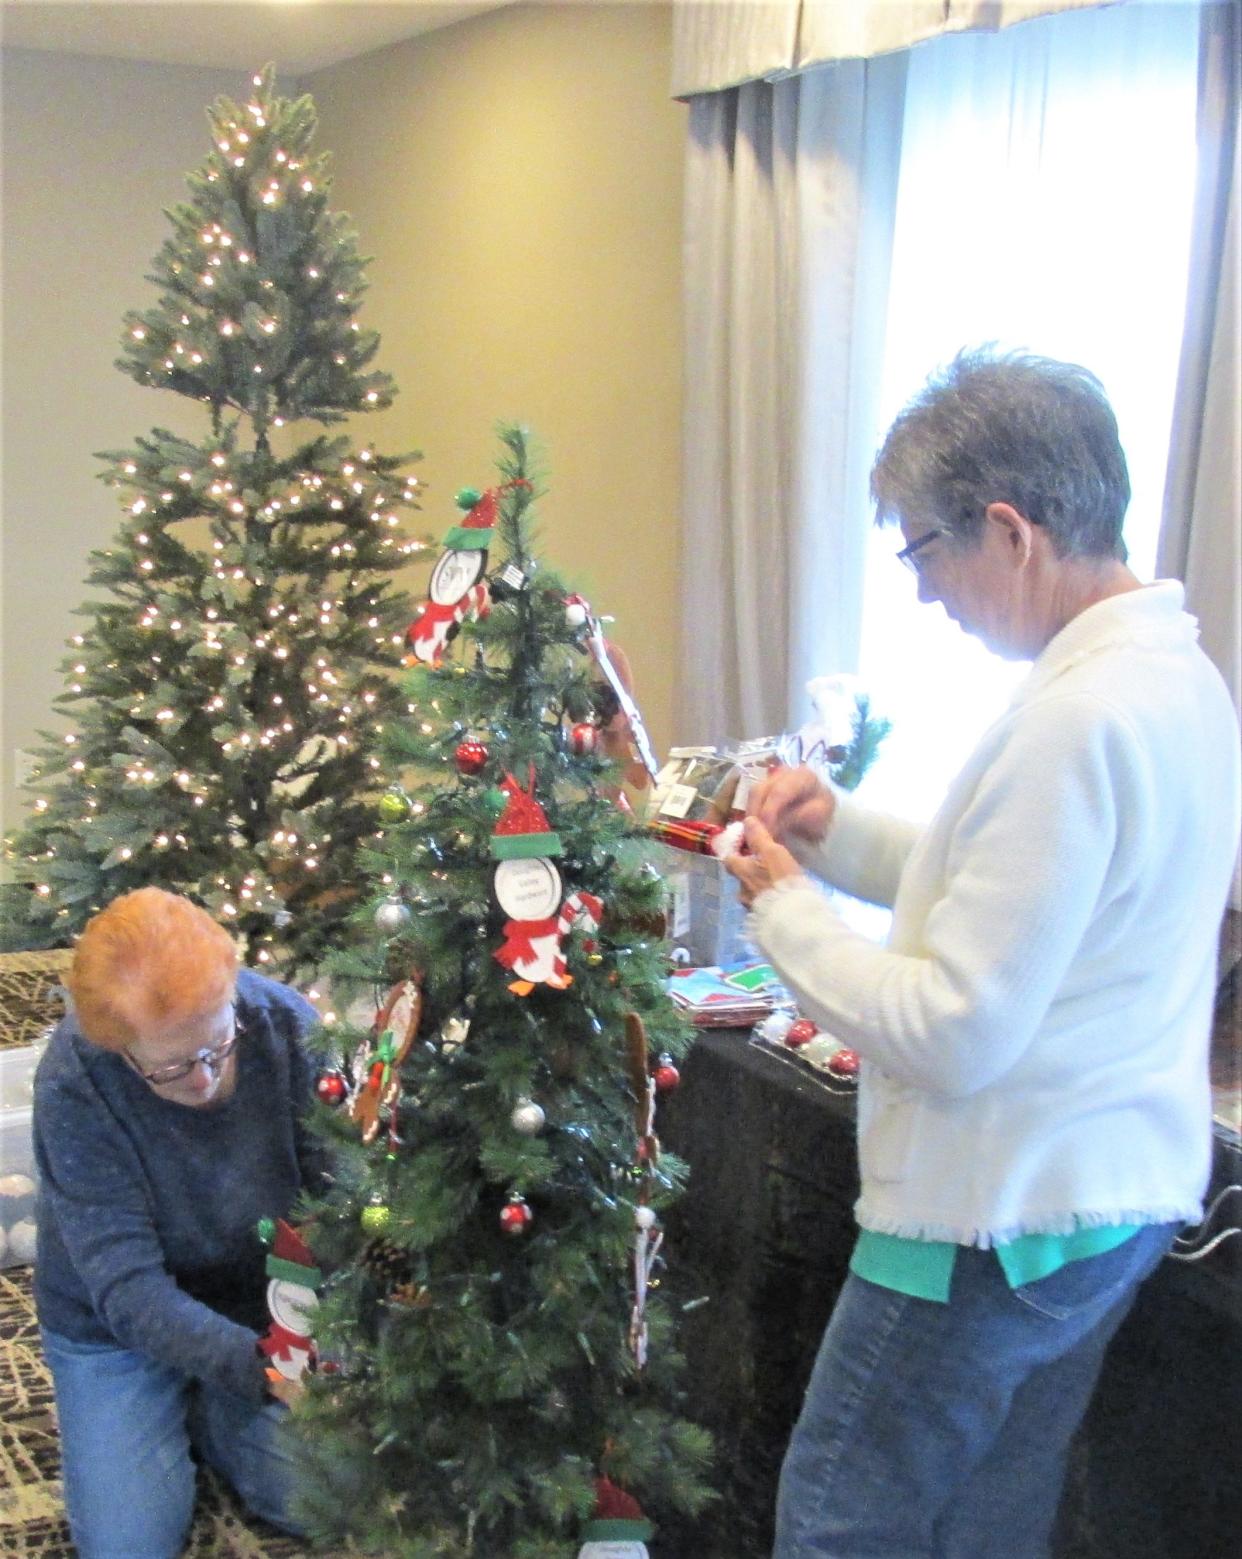 Emma Carpenter (left) and Ruth Hershberger, members of the Pomerene Hospital Auxiliary, help decorate and set up for the 12th Annual Christmas Tree Festival to be held at the Berlin Grande Hotel on Friday and Saturday.